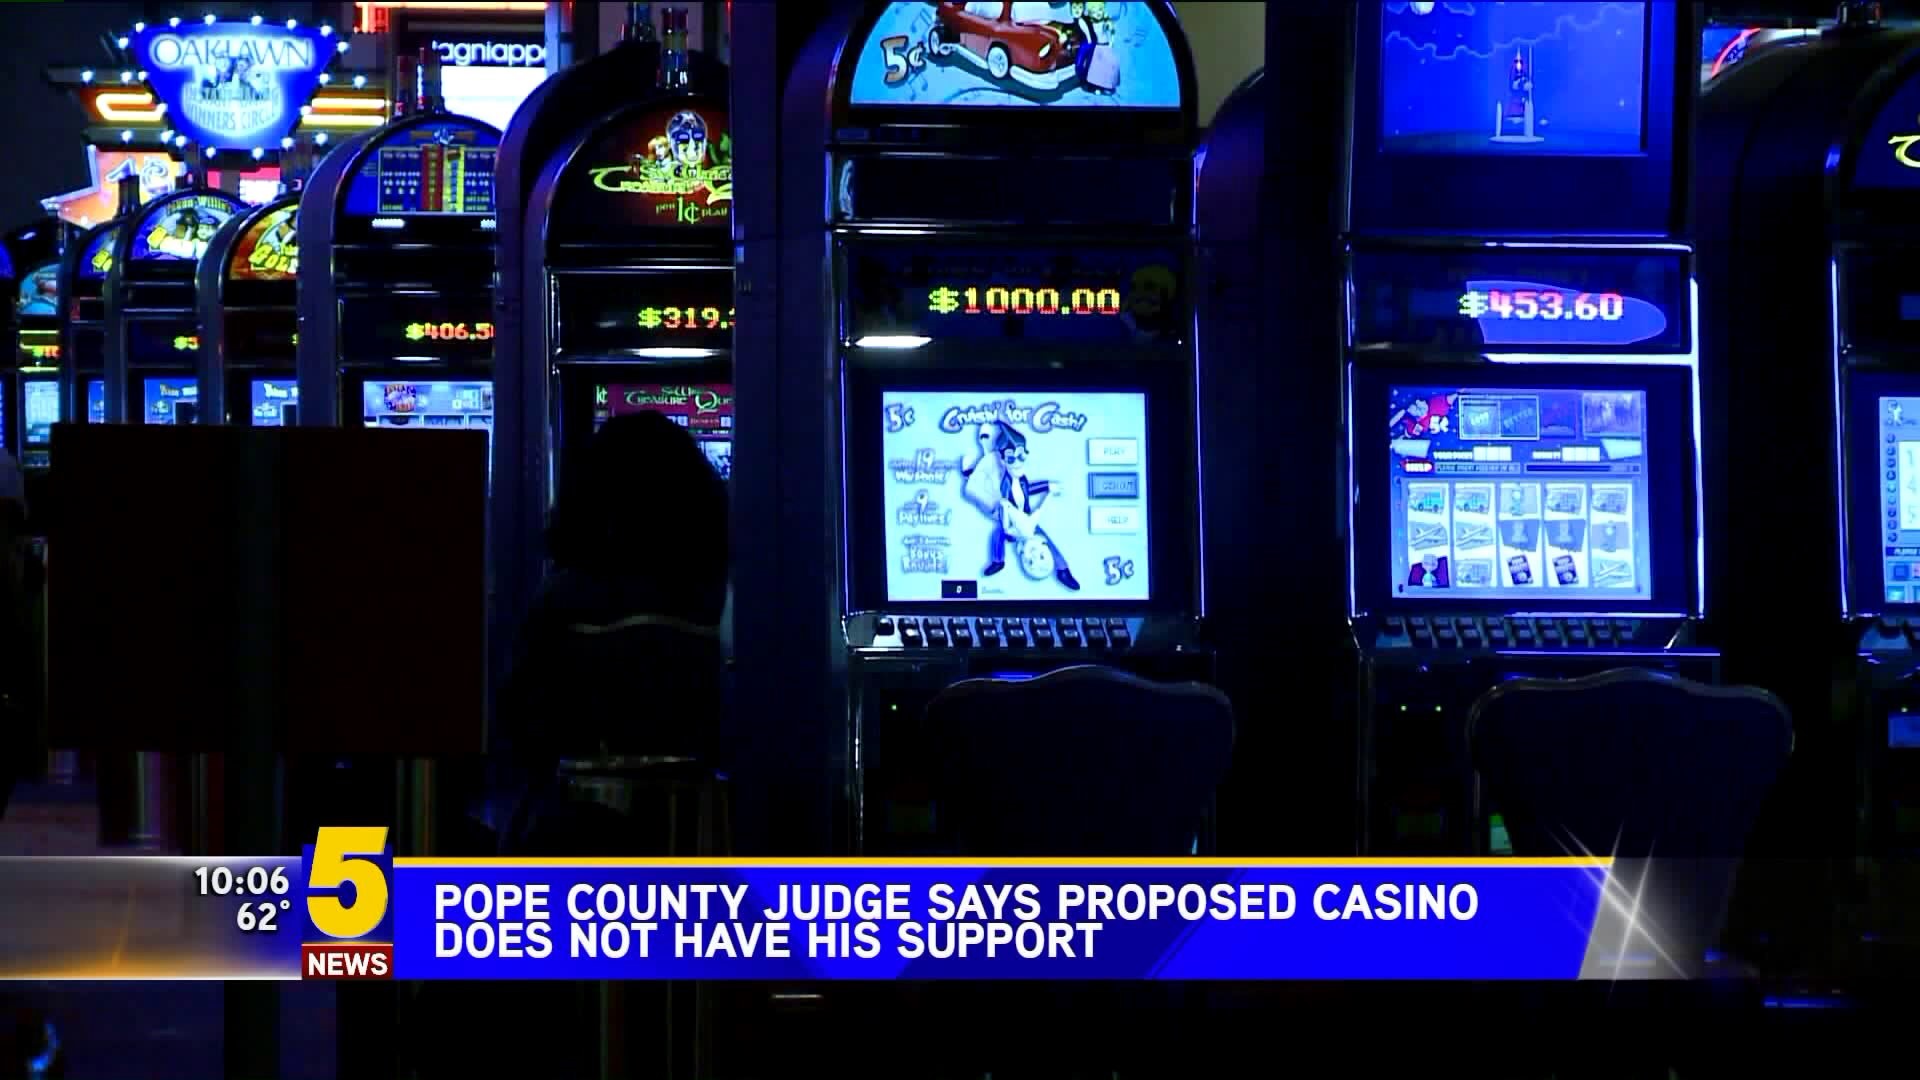 Pope County Judge Says Proposed Casino Does Not Have His Support